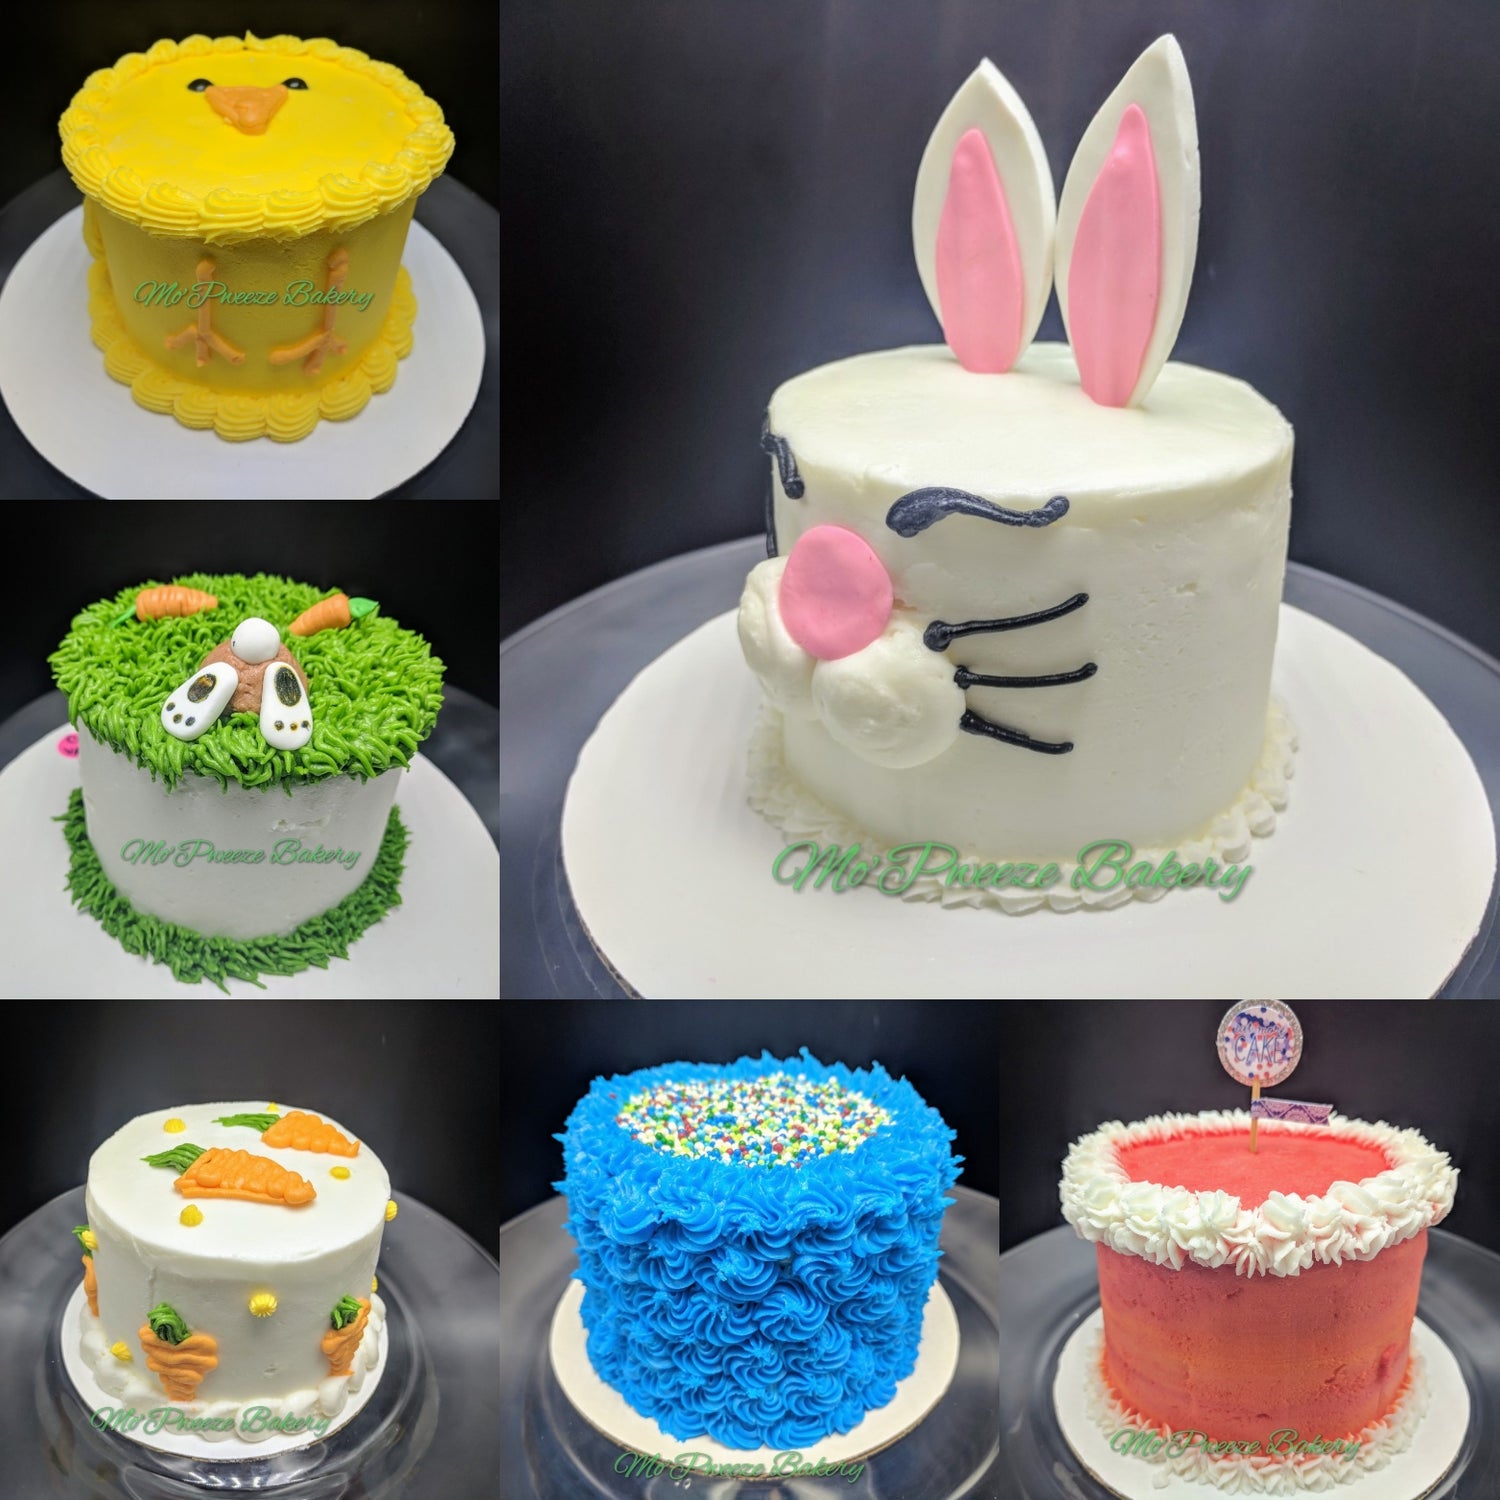 4" mini cakes. Please note which design you are interested in on the order notes.